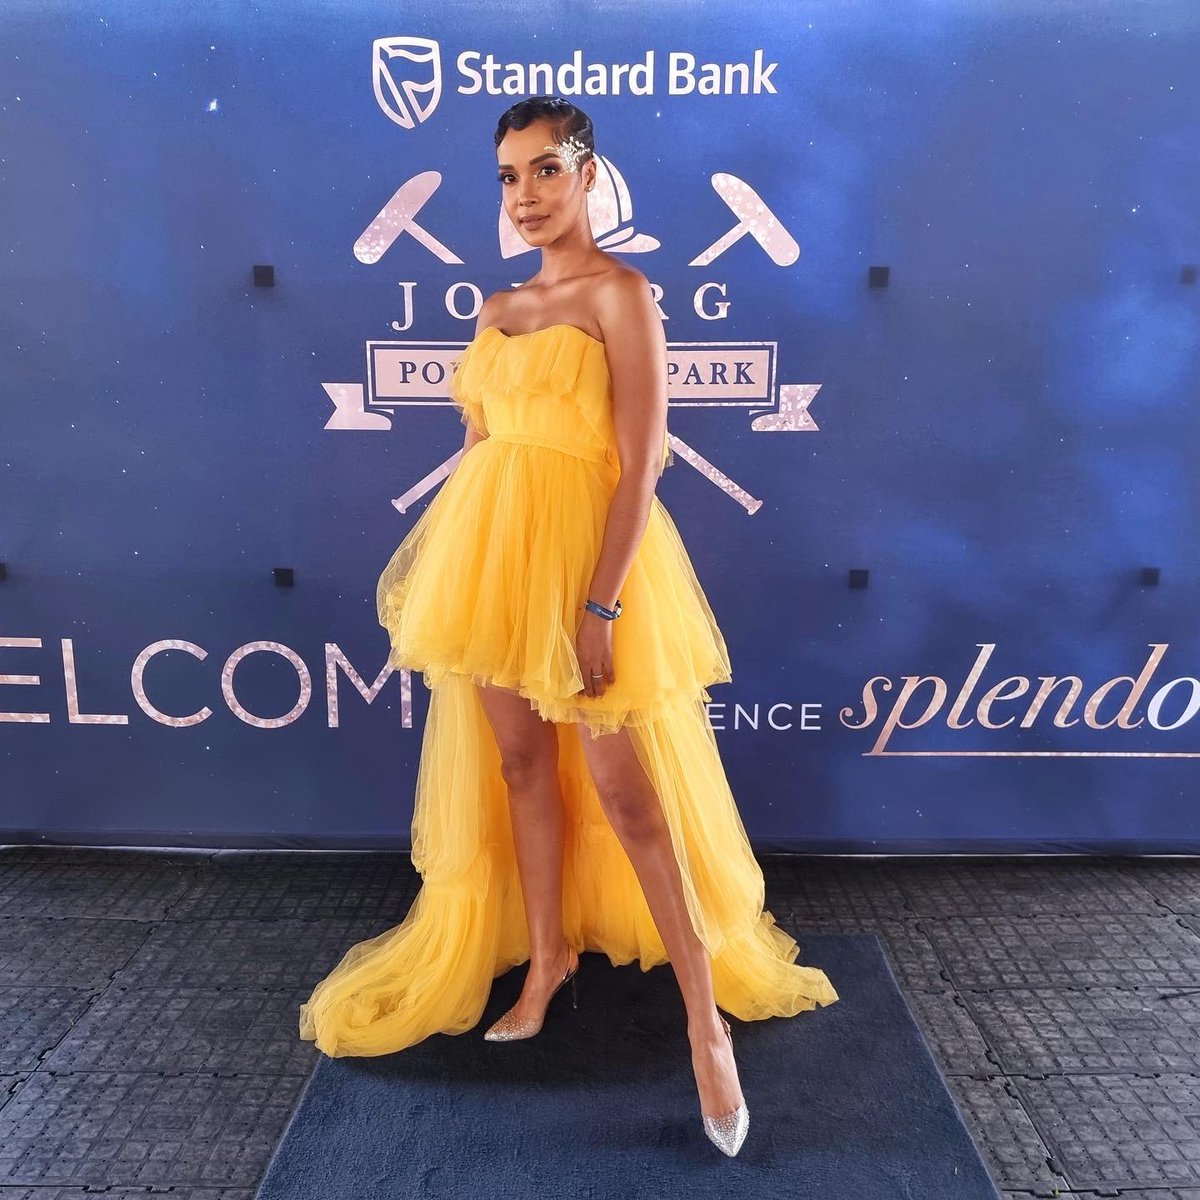 Today we’re celebrating all things vibrant, colourful, grand… and the fashion is no exception. With an atmosphere of absolute luxury and splendour, the @StandardBankZA @JoburgPolo is the perfect place to indulge in the finer things🥂 #SteynCity #SBJPolointhePark